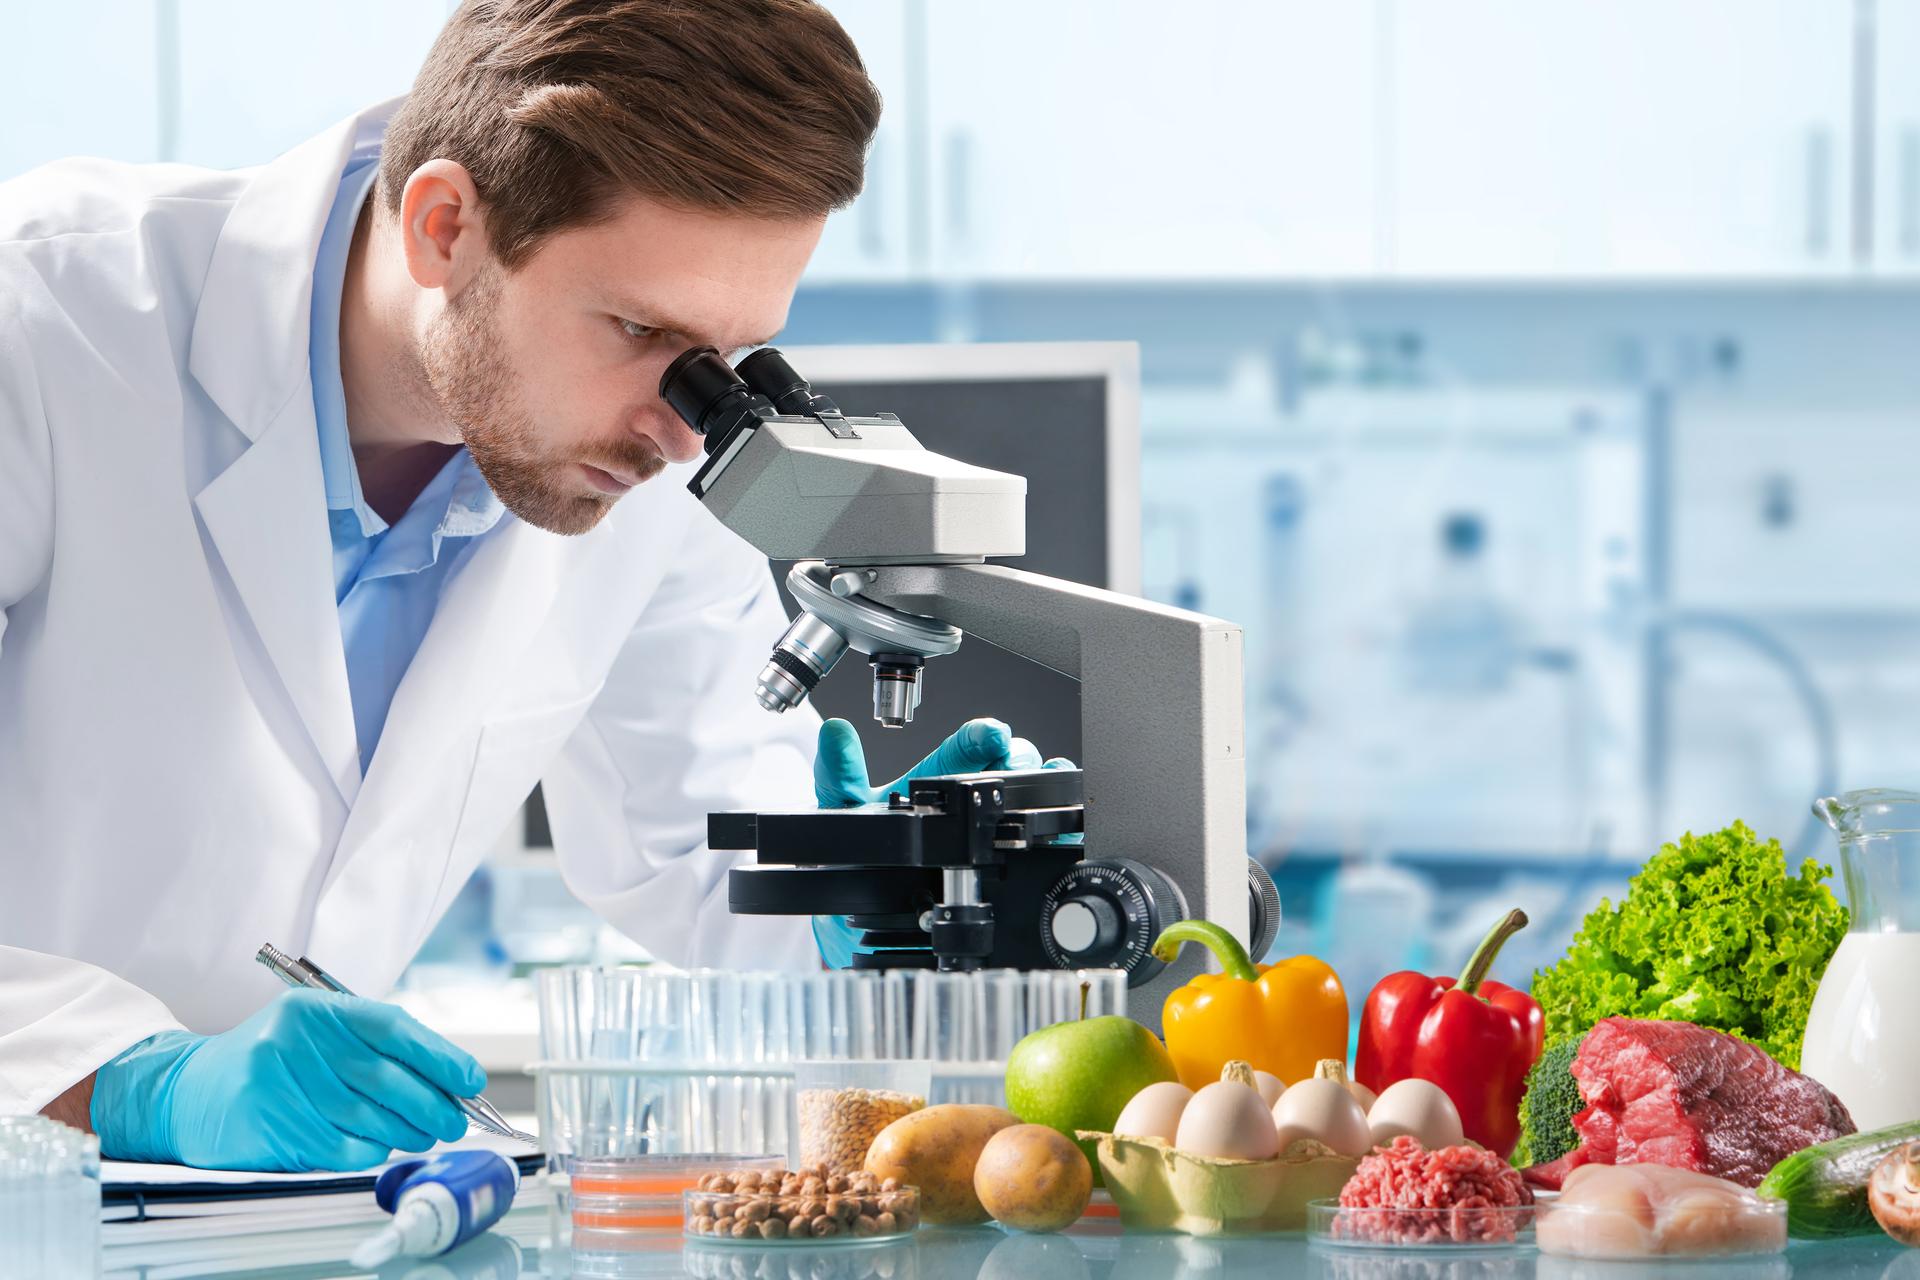 Scientist uses microscope to inspect food samples